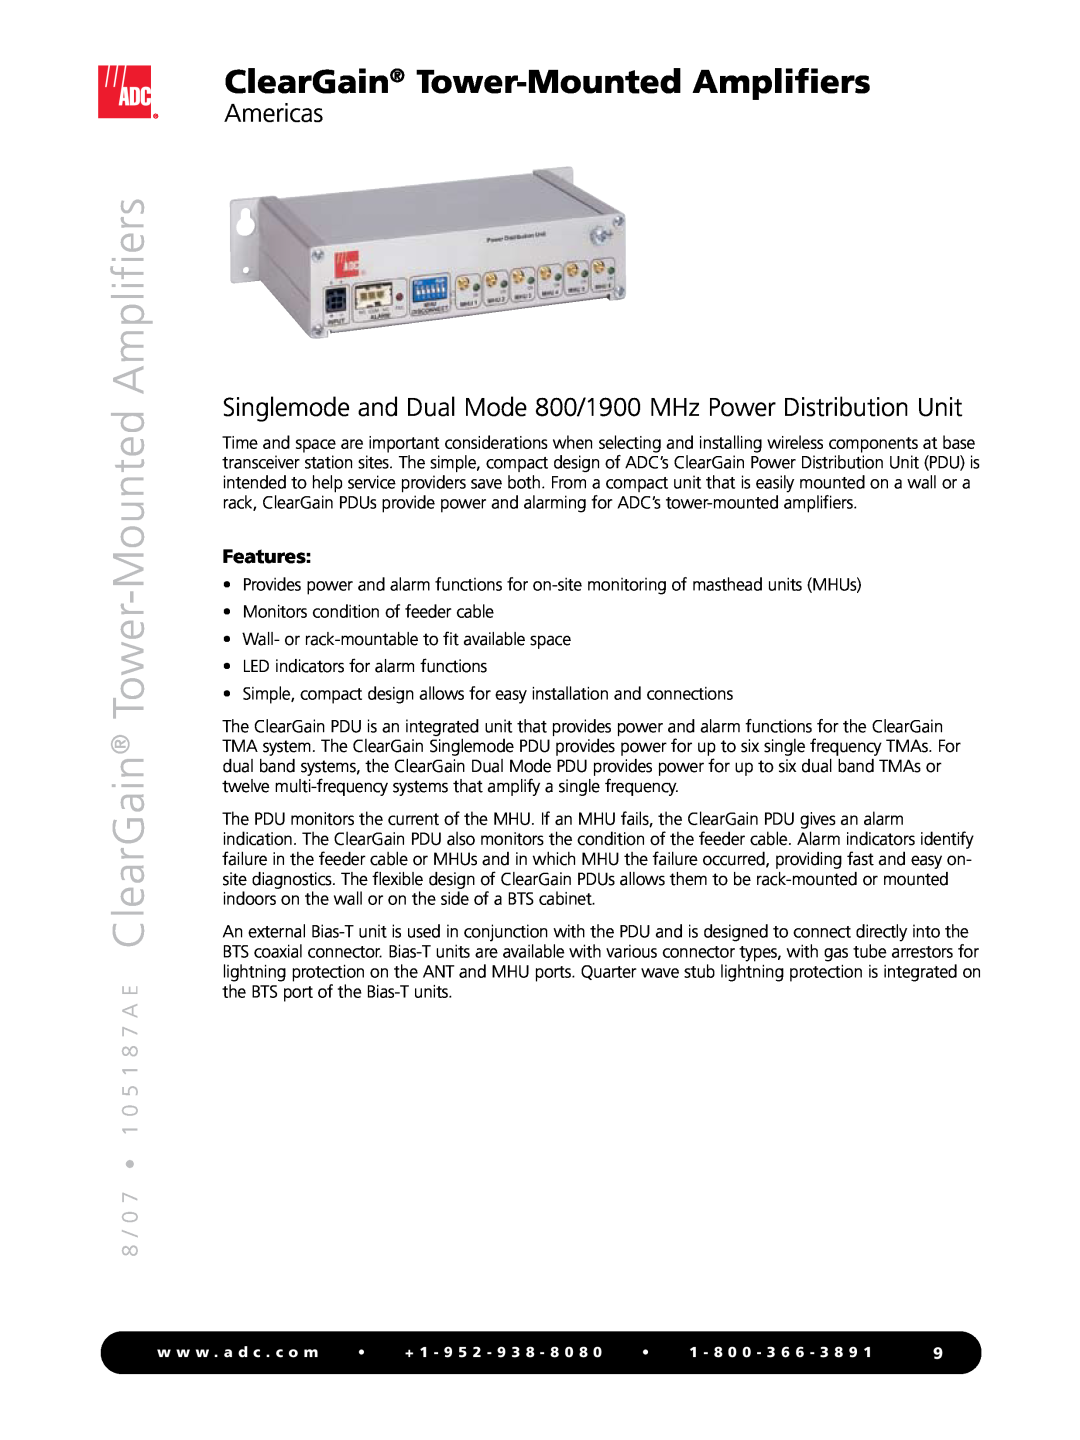 ADC Tower-Mounted Amplifiers manual ClearGain Tower-MountedAmplifiers, Americas, Features 